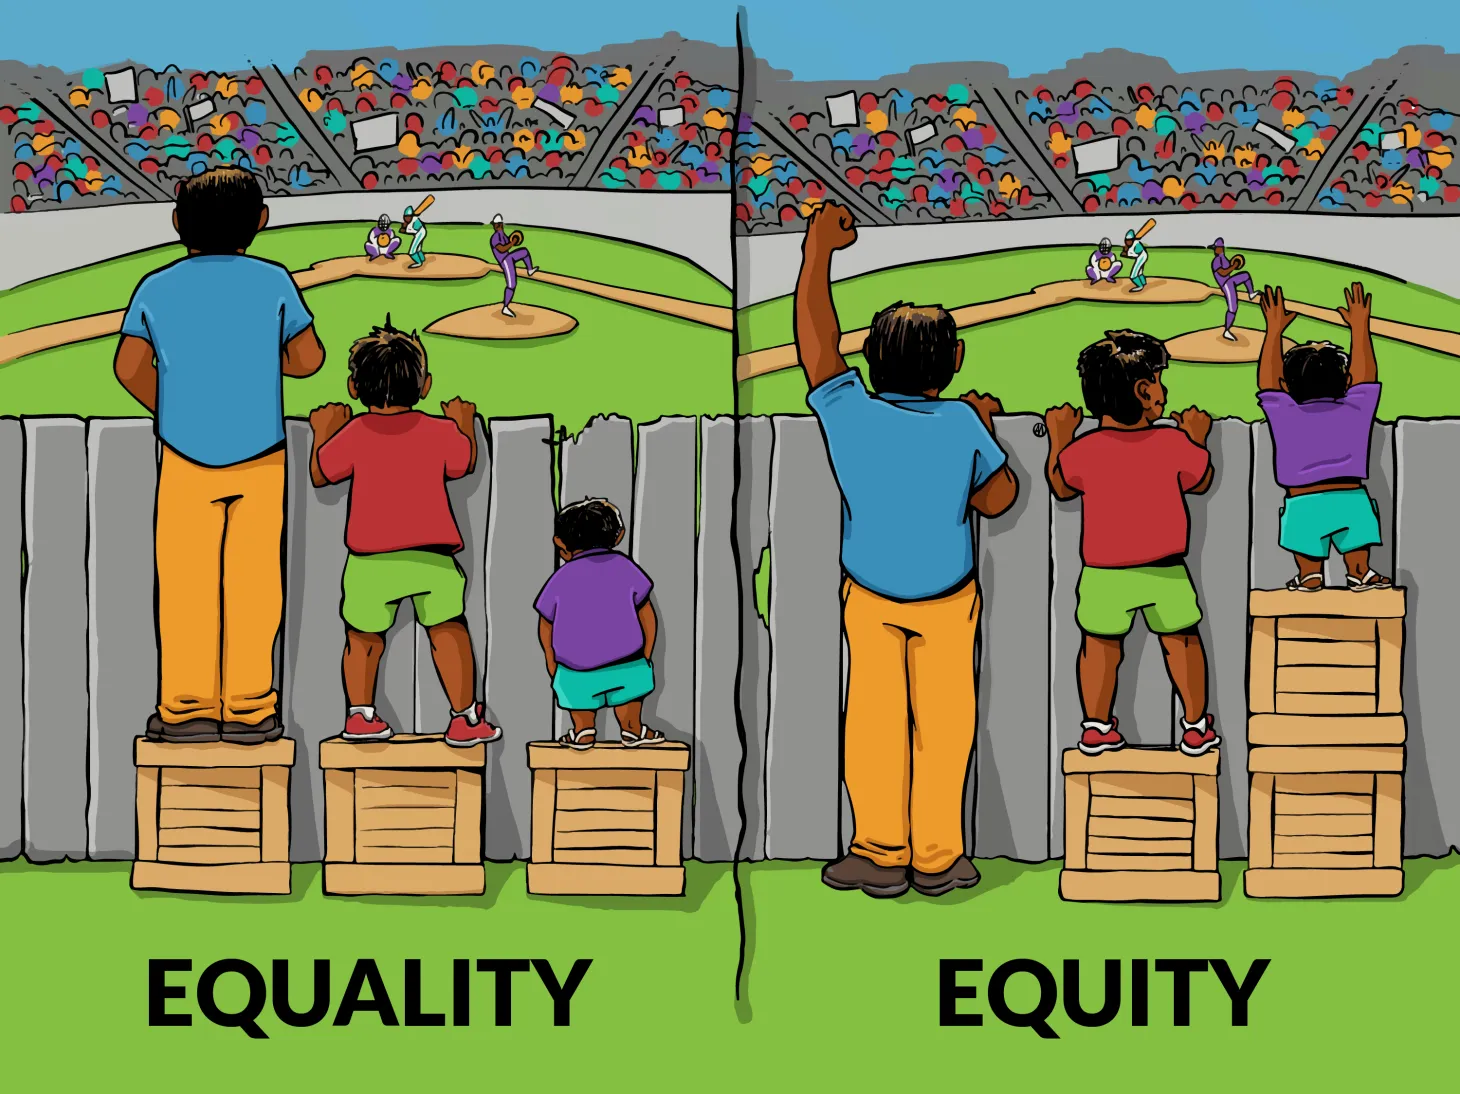 Equity vs Equality: What’s the Difference?